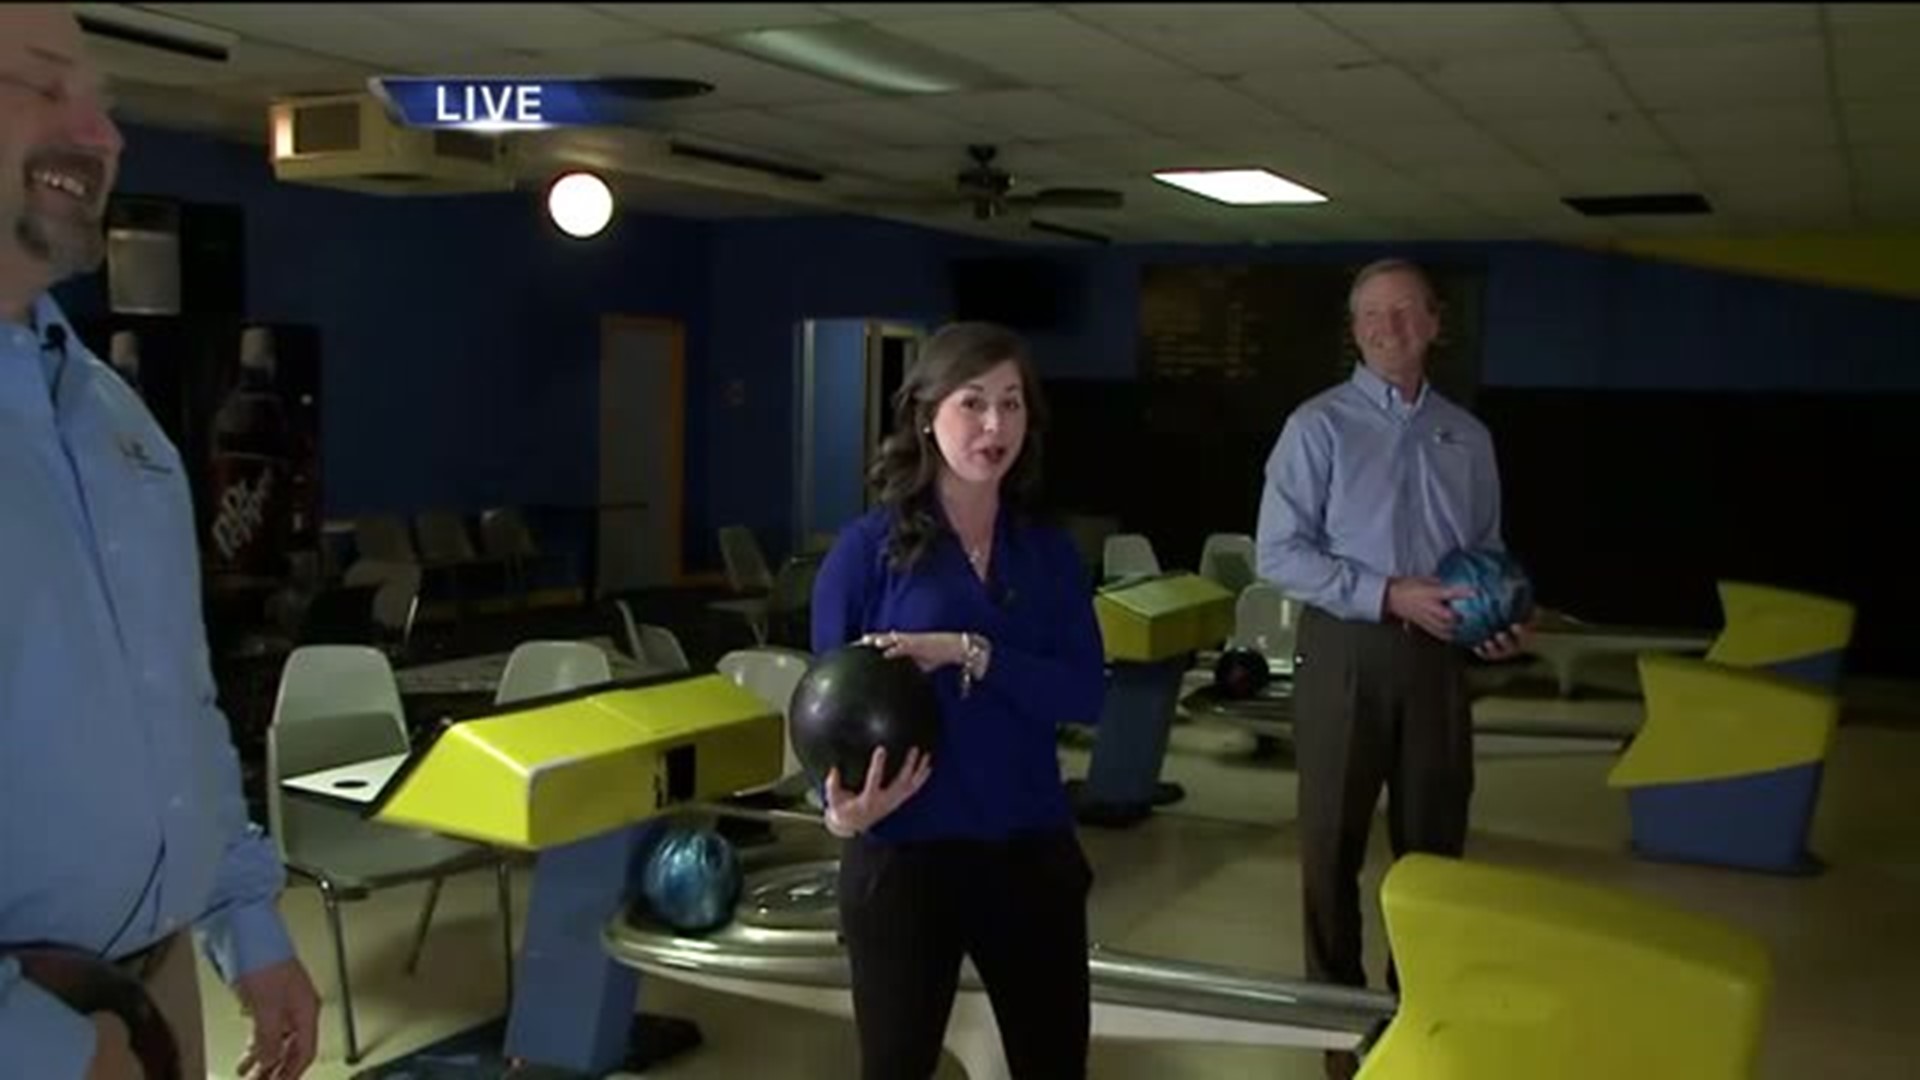 Angie, Jeff, and David Bowl Live on the Air